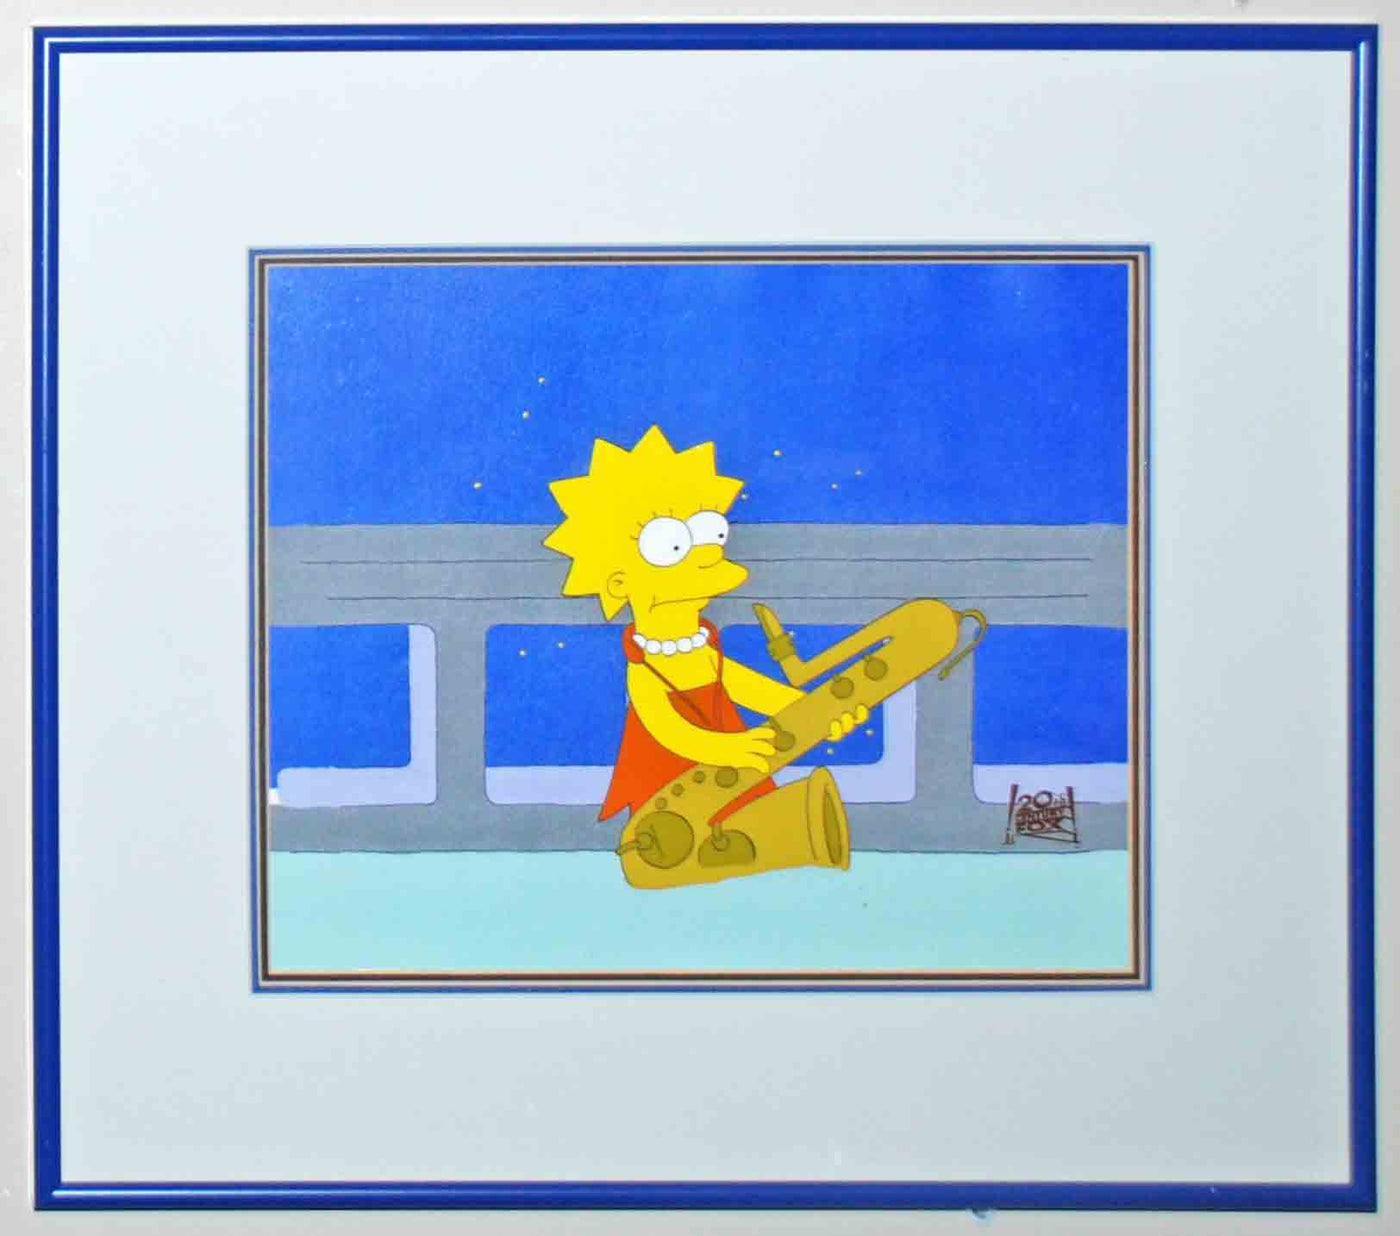 Original Simpsons Production Cel from the Simpsons featuring Lisa